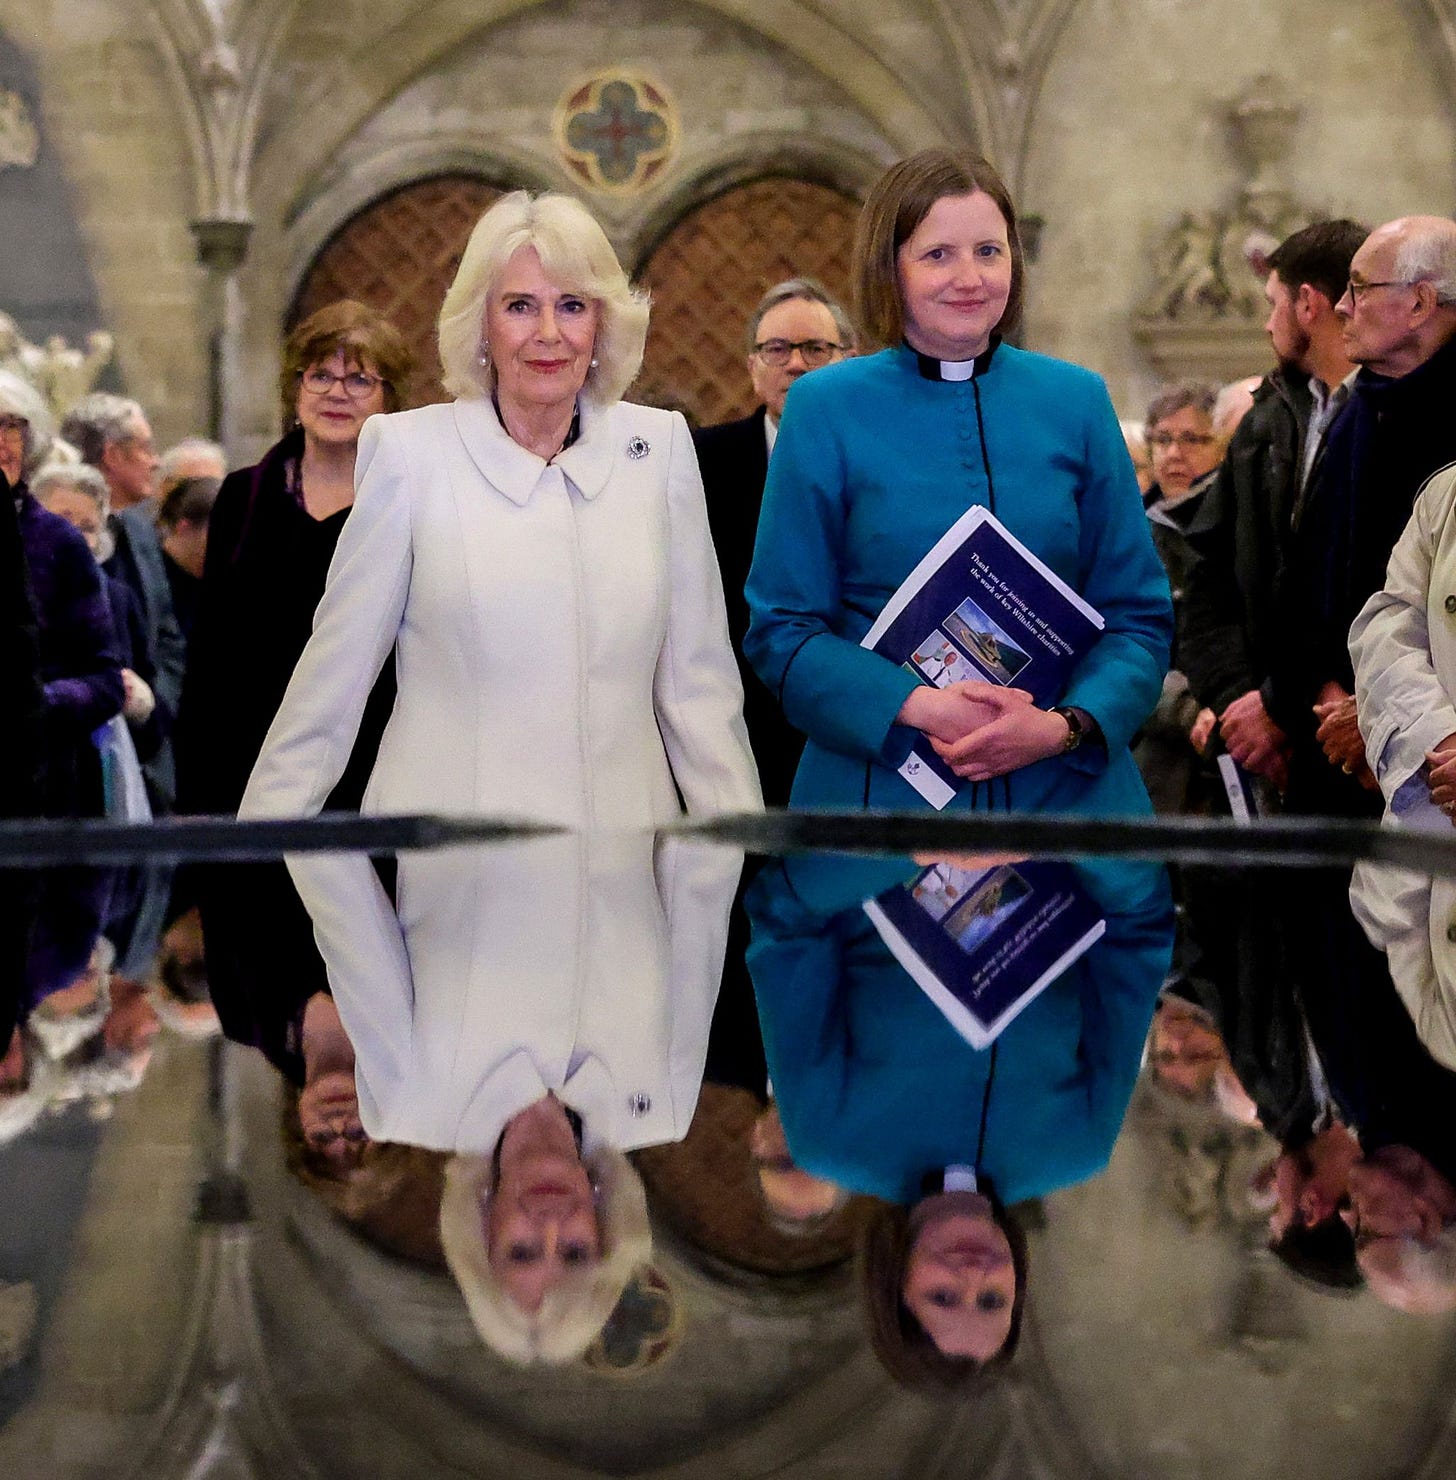 Camilla stood in front of the reflecting pool in Salisbury Cathedral